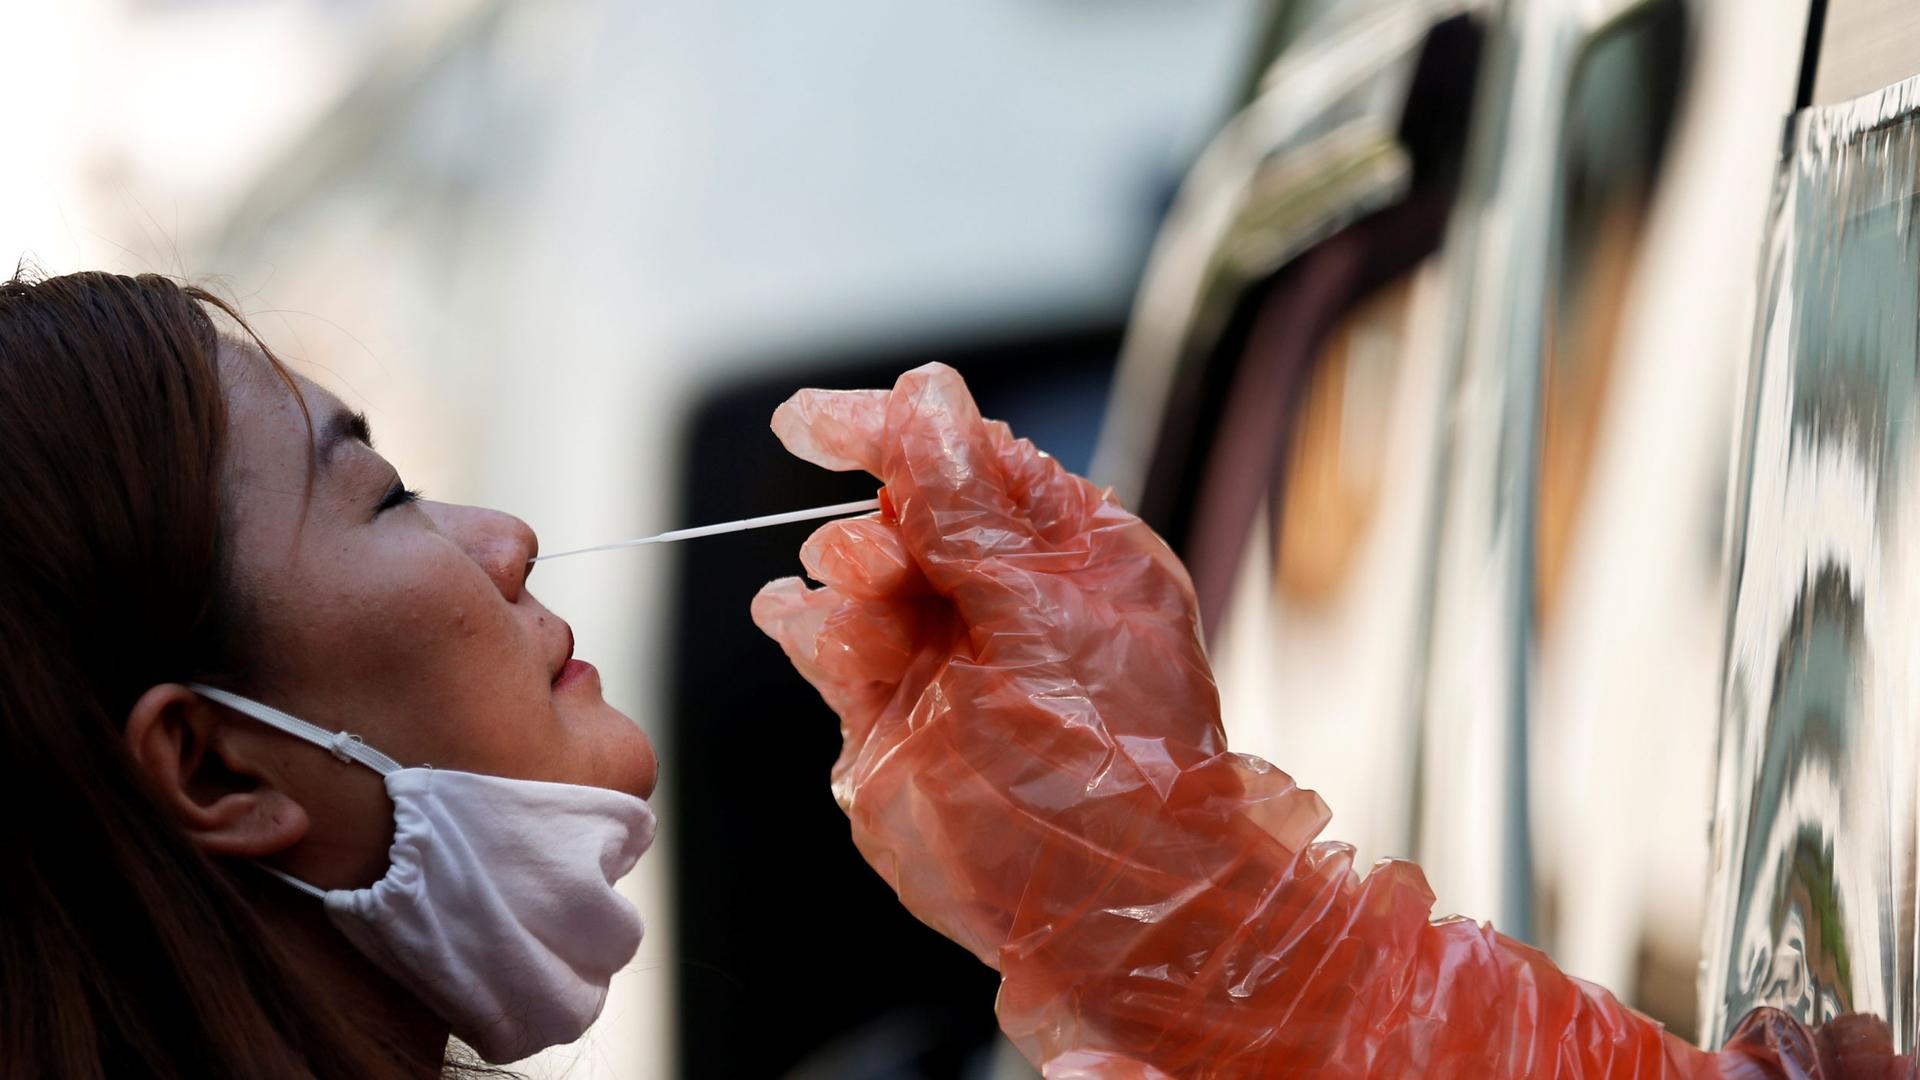 A woman is shown leaning her head back slightly with a protective mask pulled down and a health care worker reaches out with a swab.